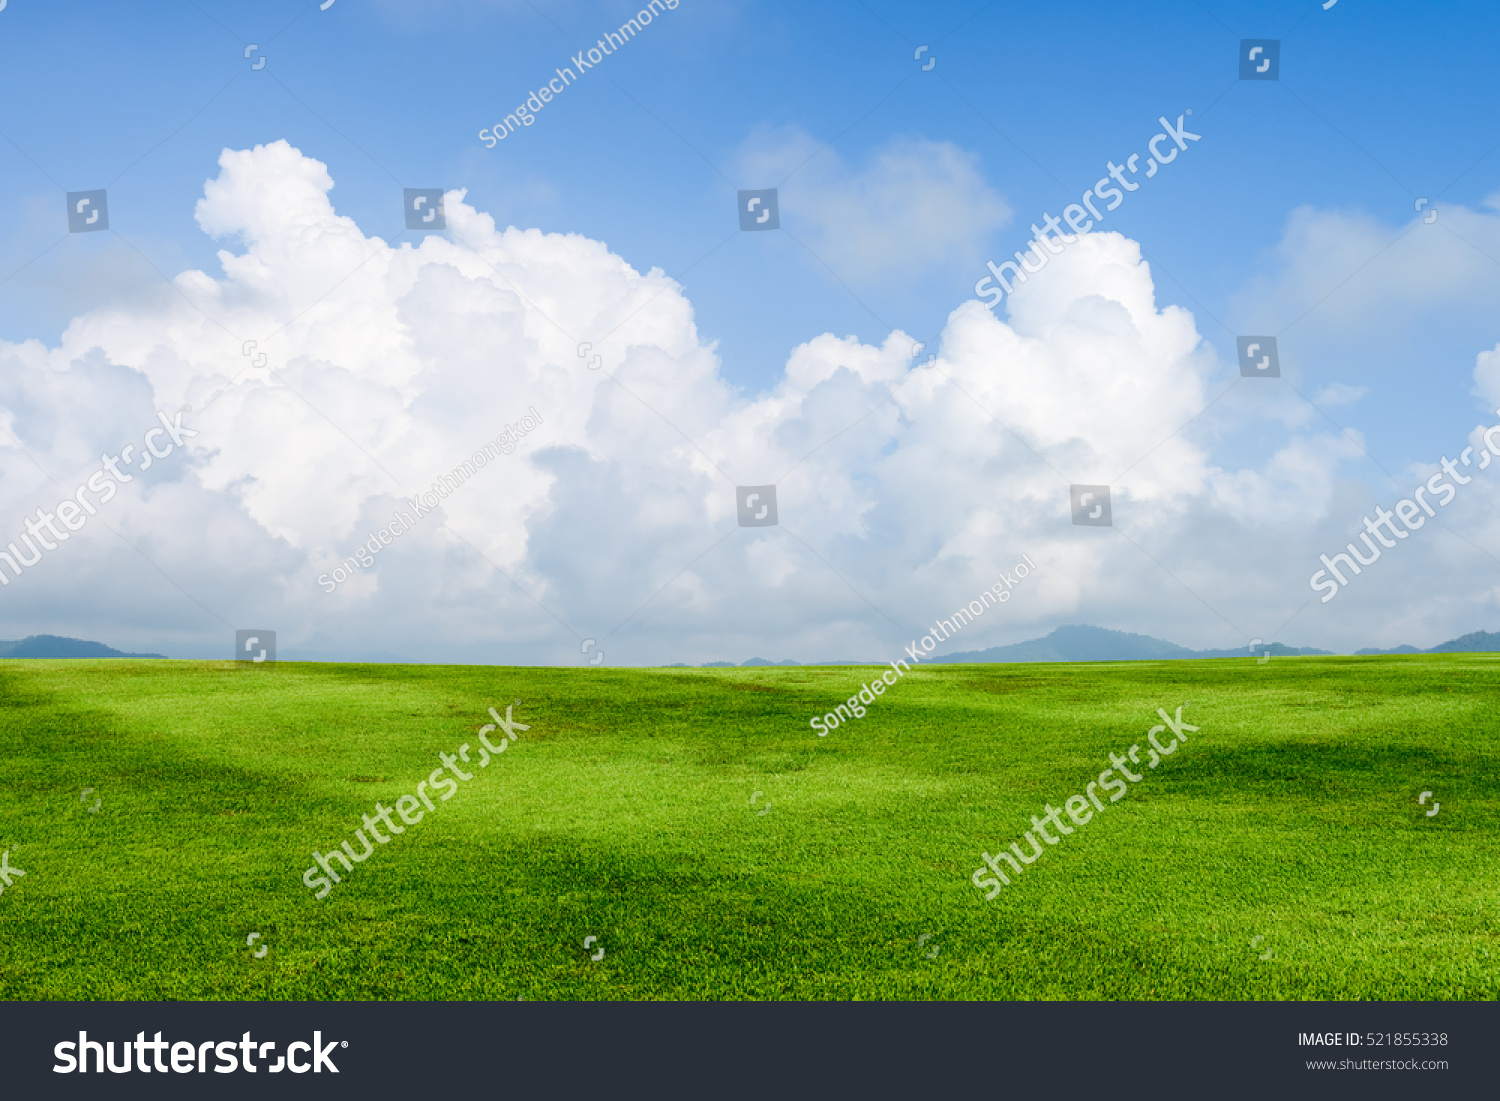 green grass field on blue sky with cloud background #521855338